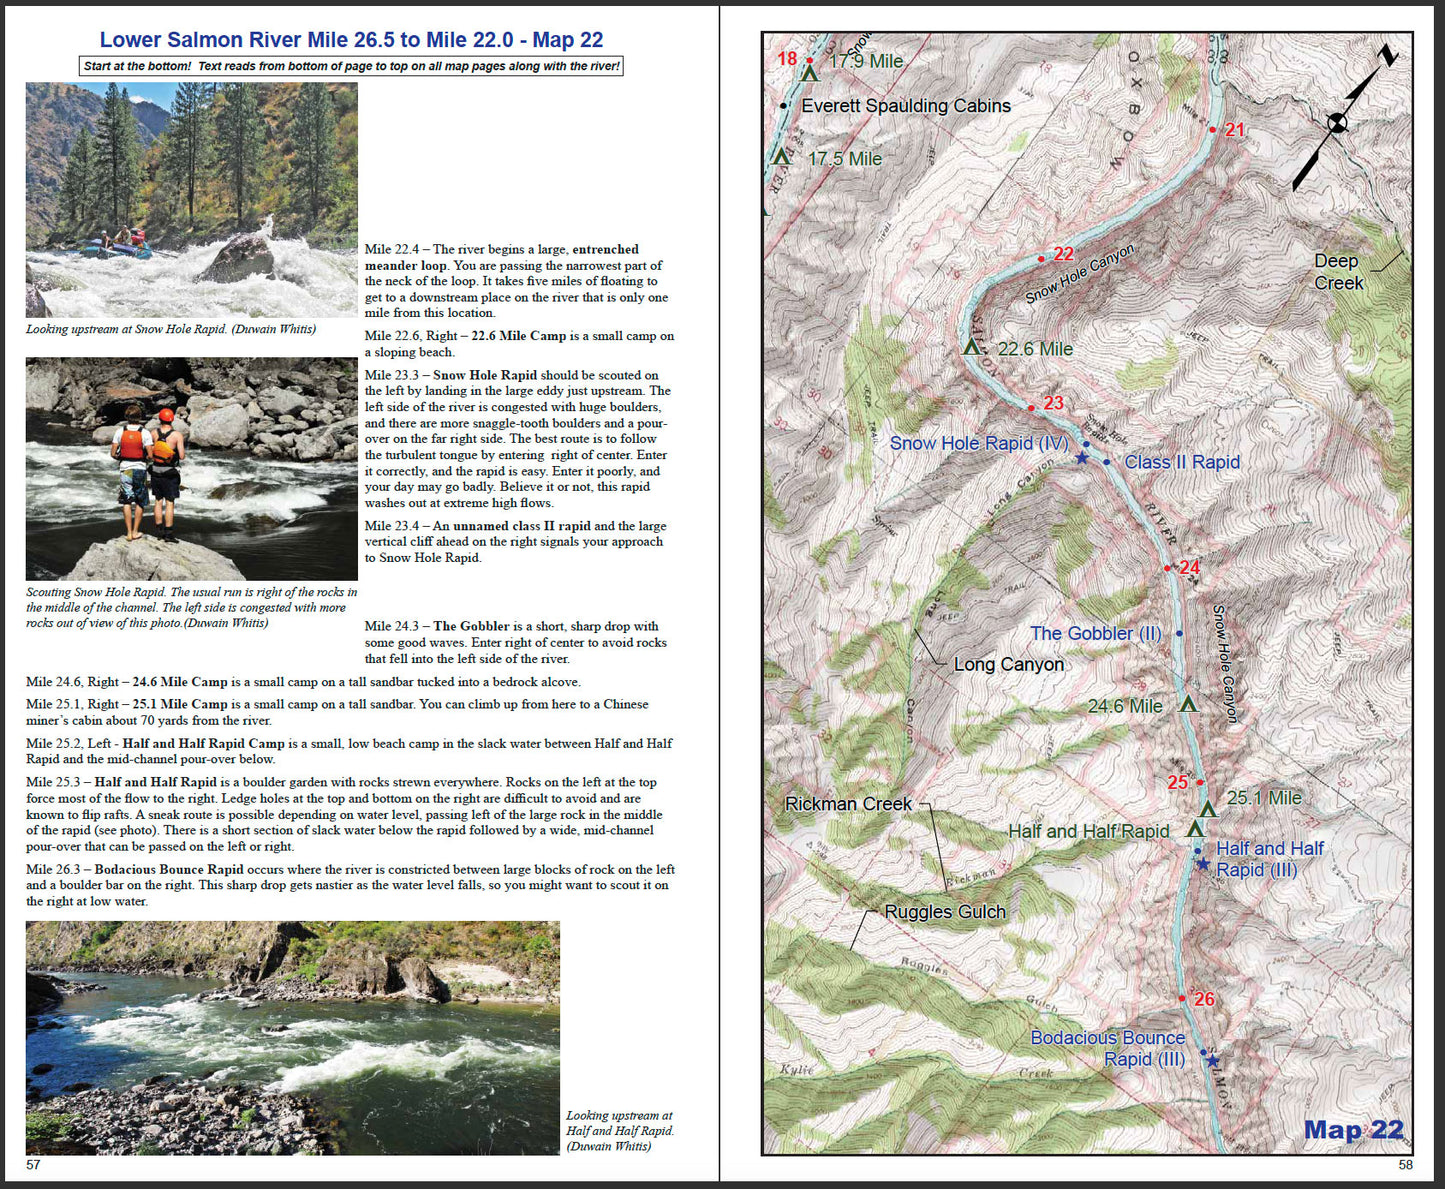 A Rivermaps guide to the Snake River in Hells Canyon and the Lower Salmon River, both located along the Snake River.